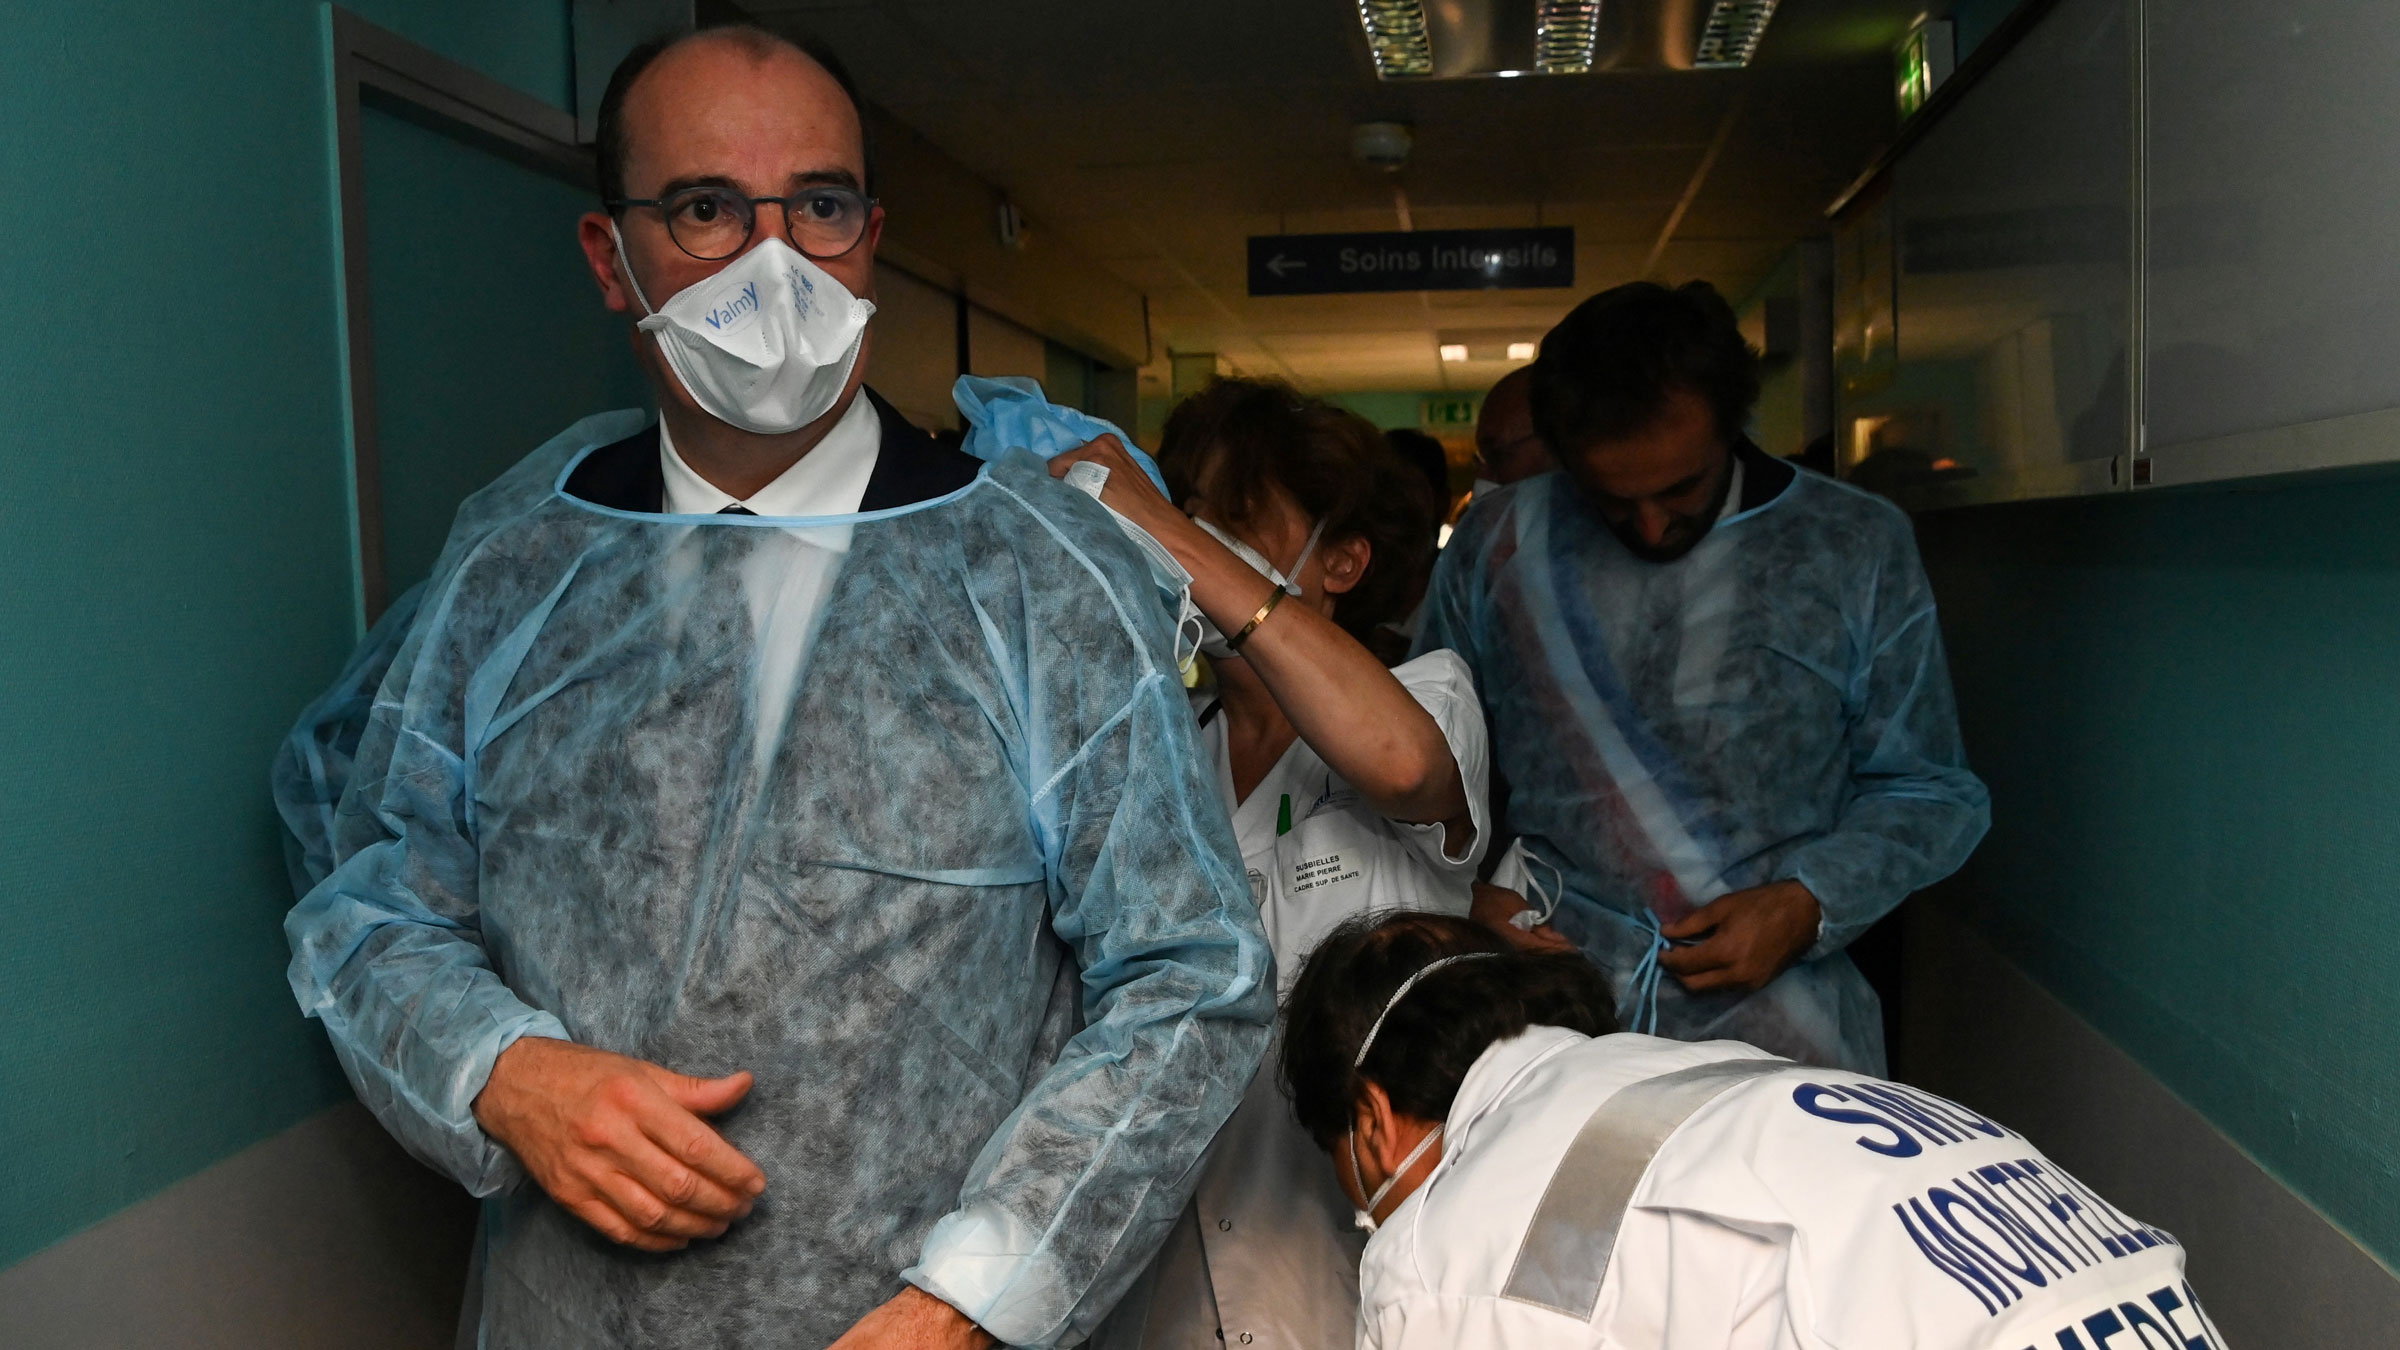 French Prime Minister Jean Castex, left, is helped into a protective suit before visiting a hospital in Montpellier, France, on Tuesday.